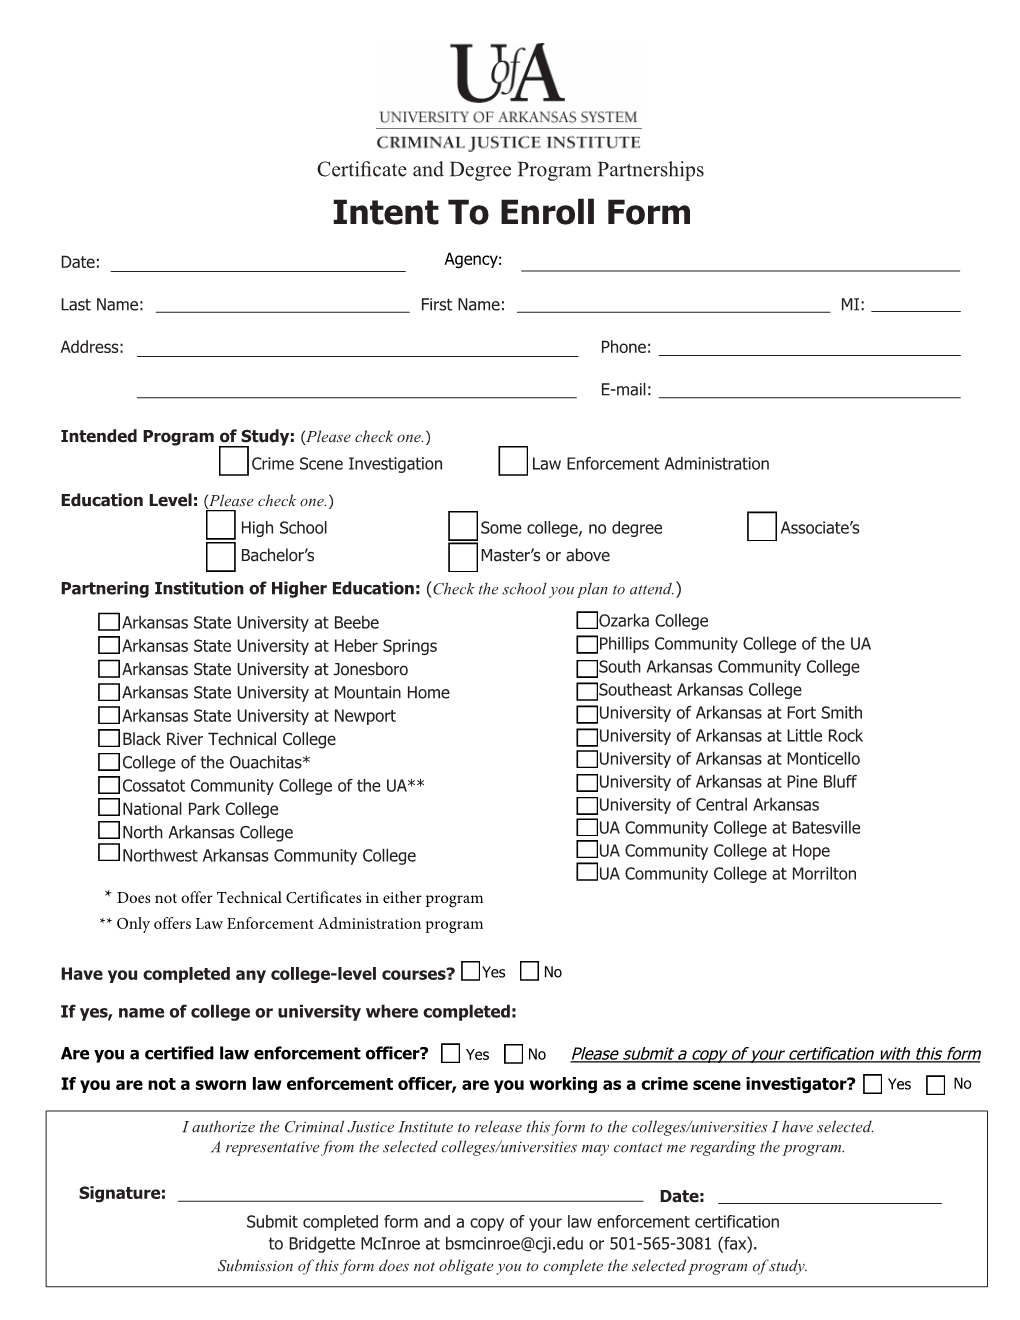 Intent to Enroll Form